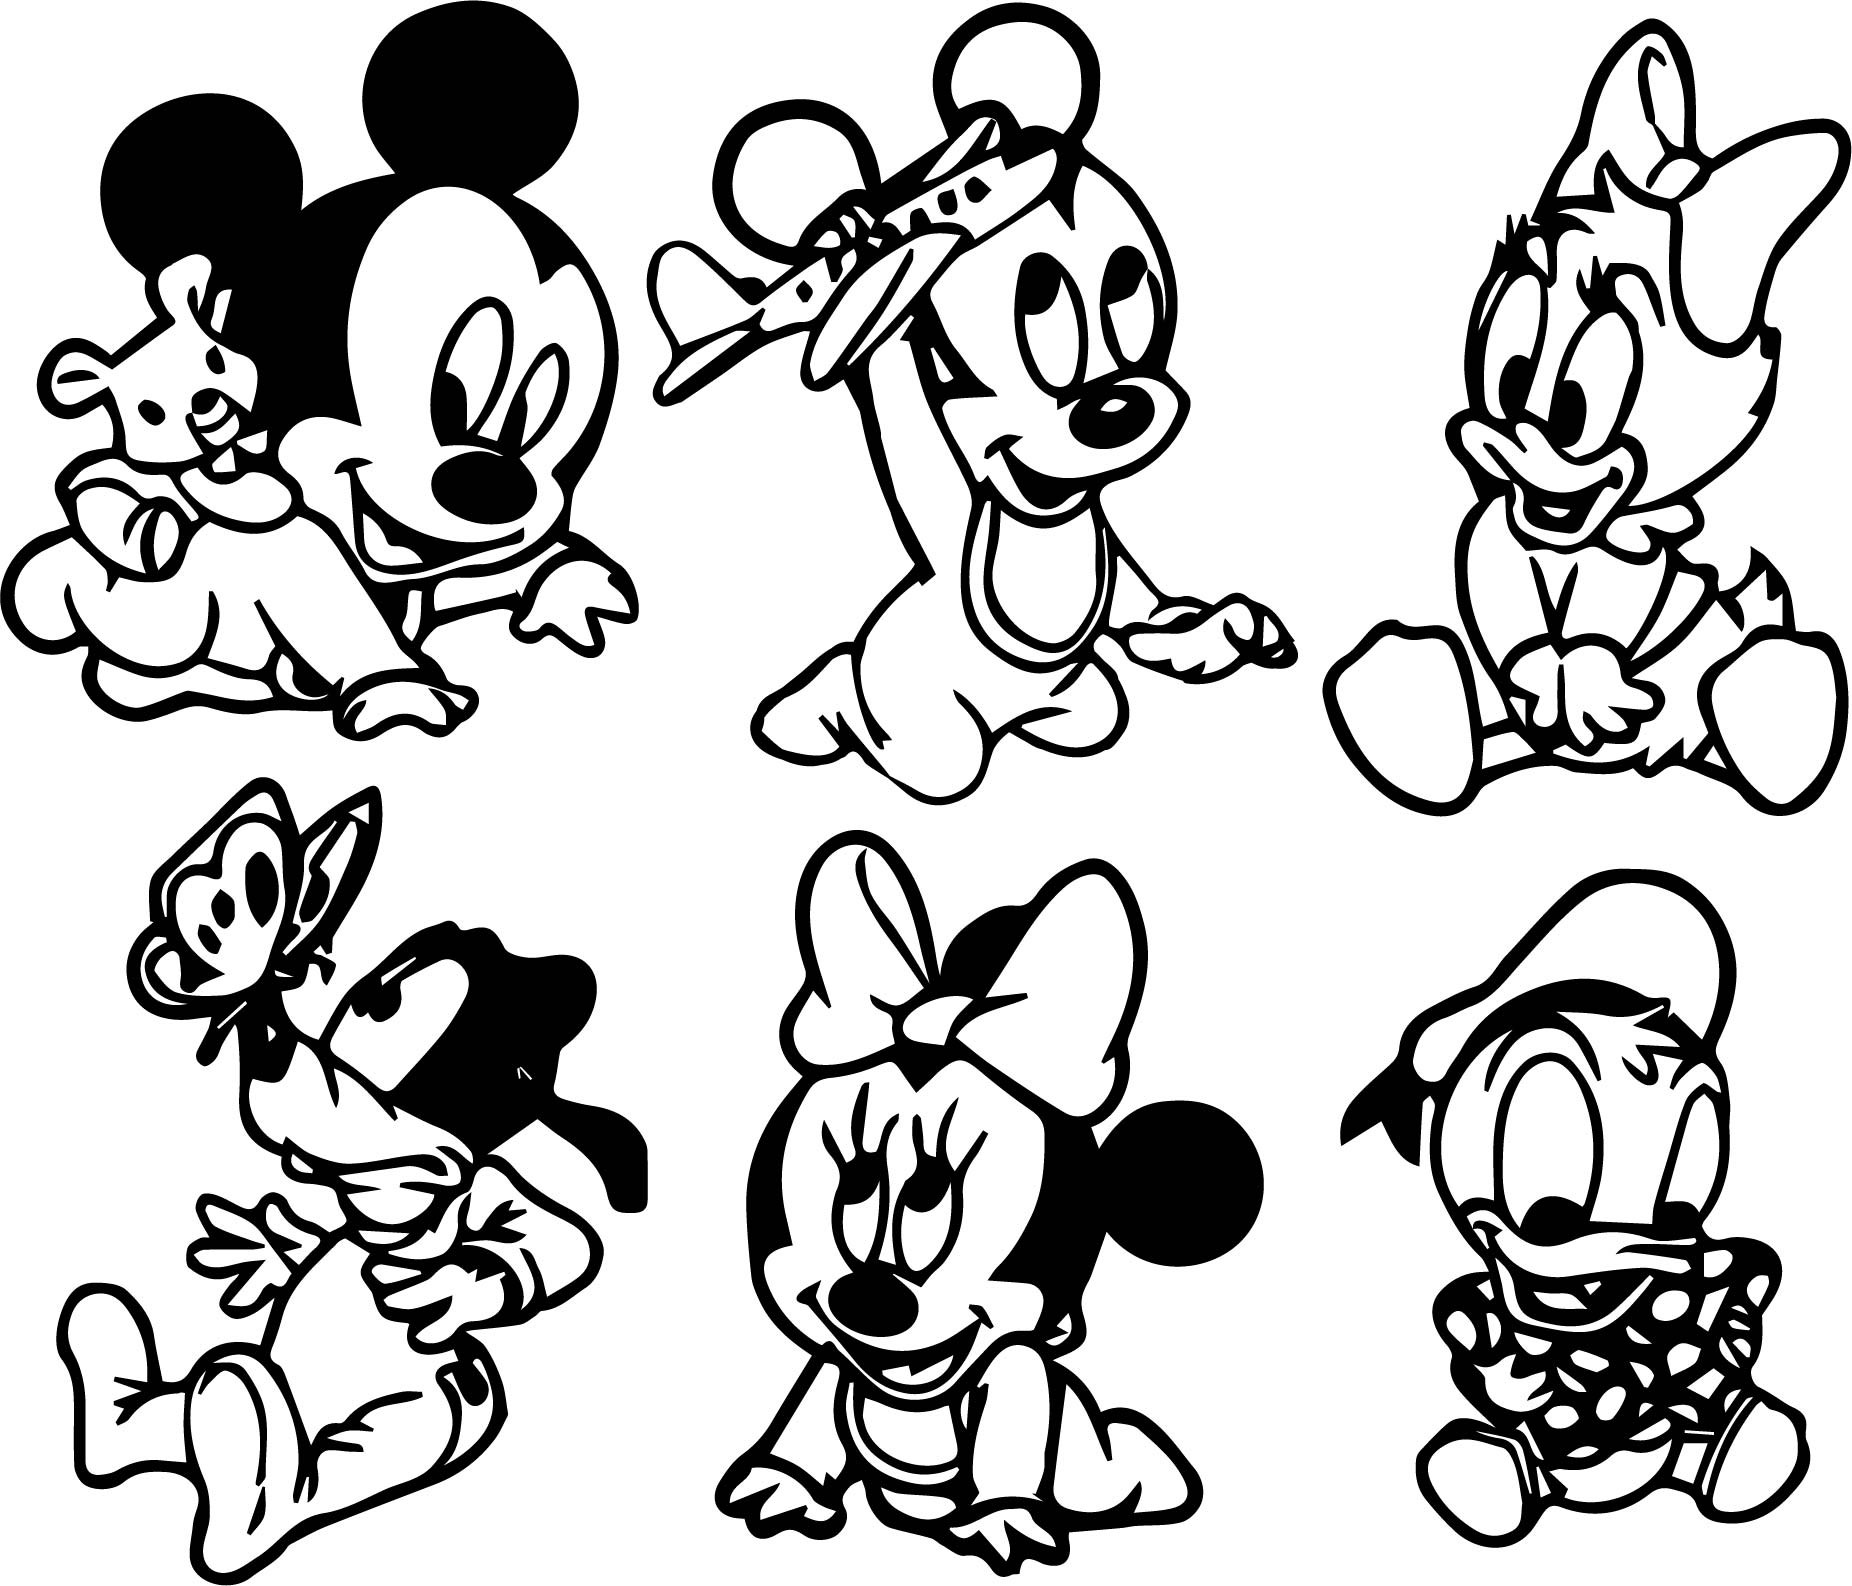 Baby Mickey Mouse Coloring Page
 All Characters Baby Mickey Coloring Page